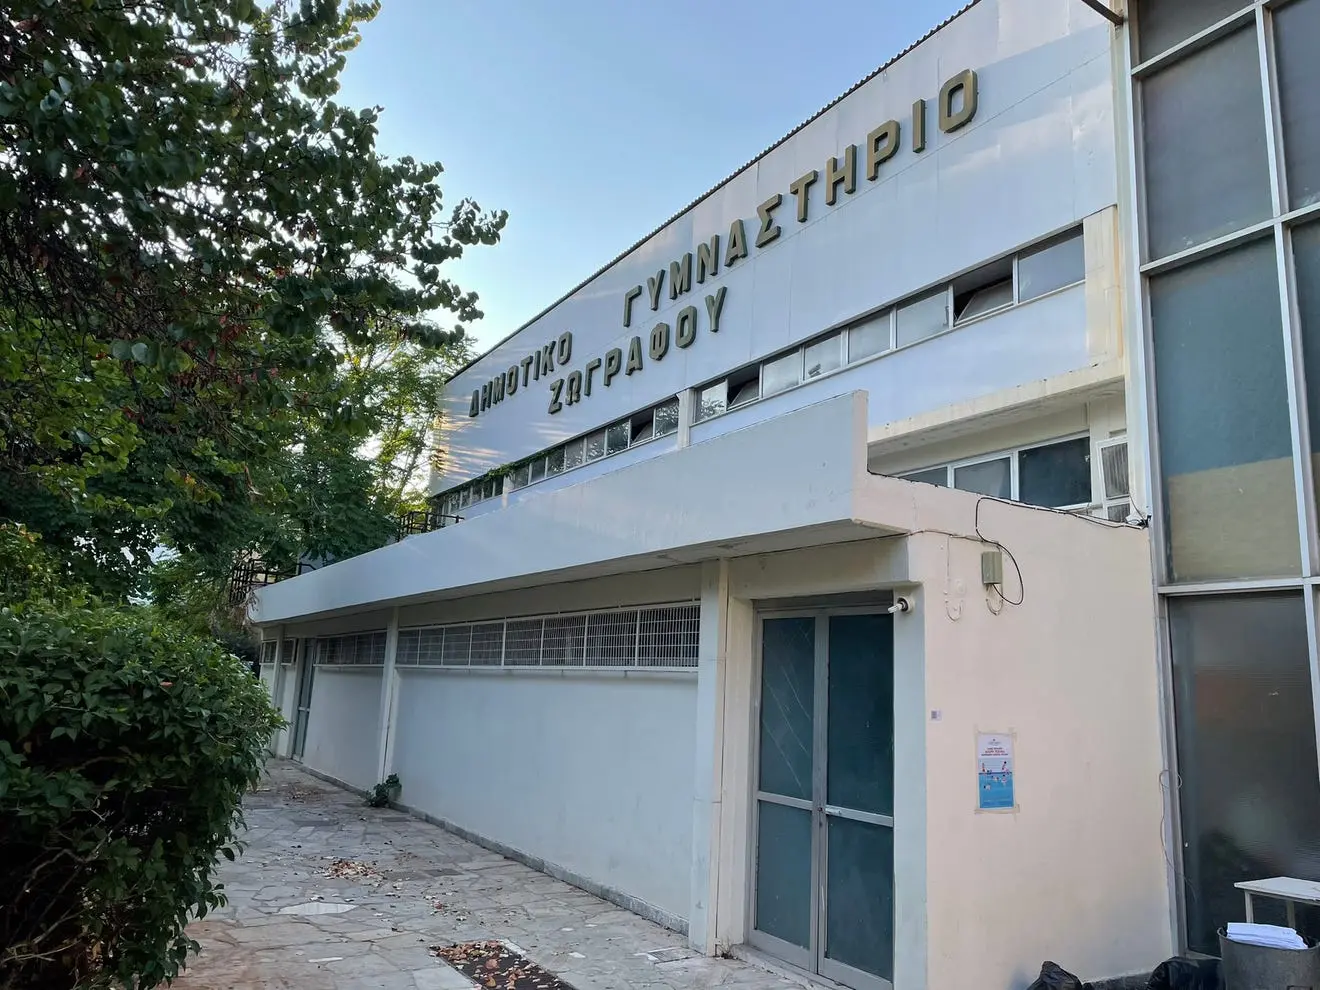 The outside of the Athens gym where Giannis Antetokounmpo trained